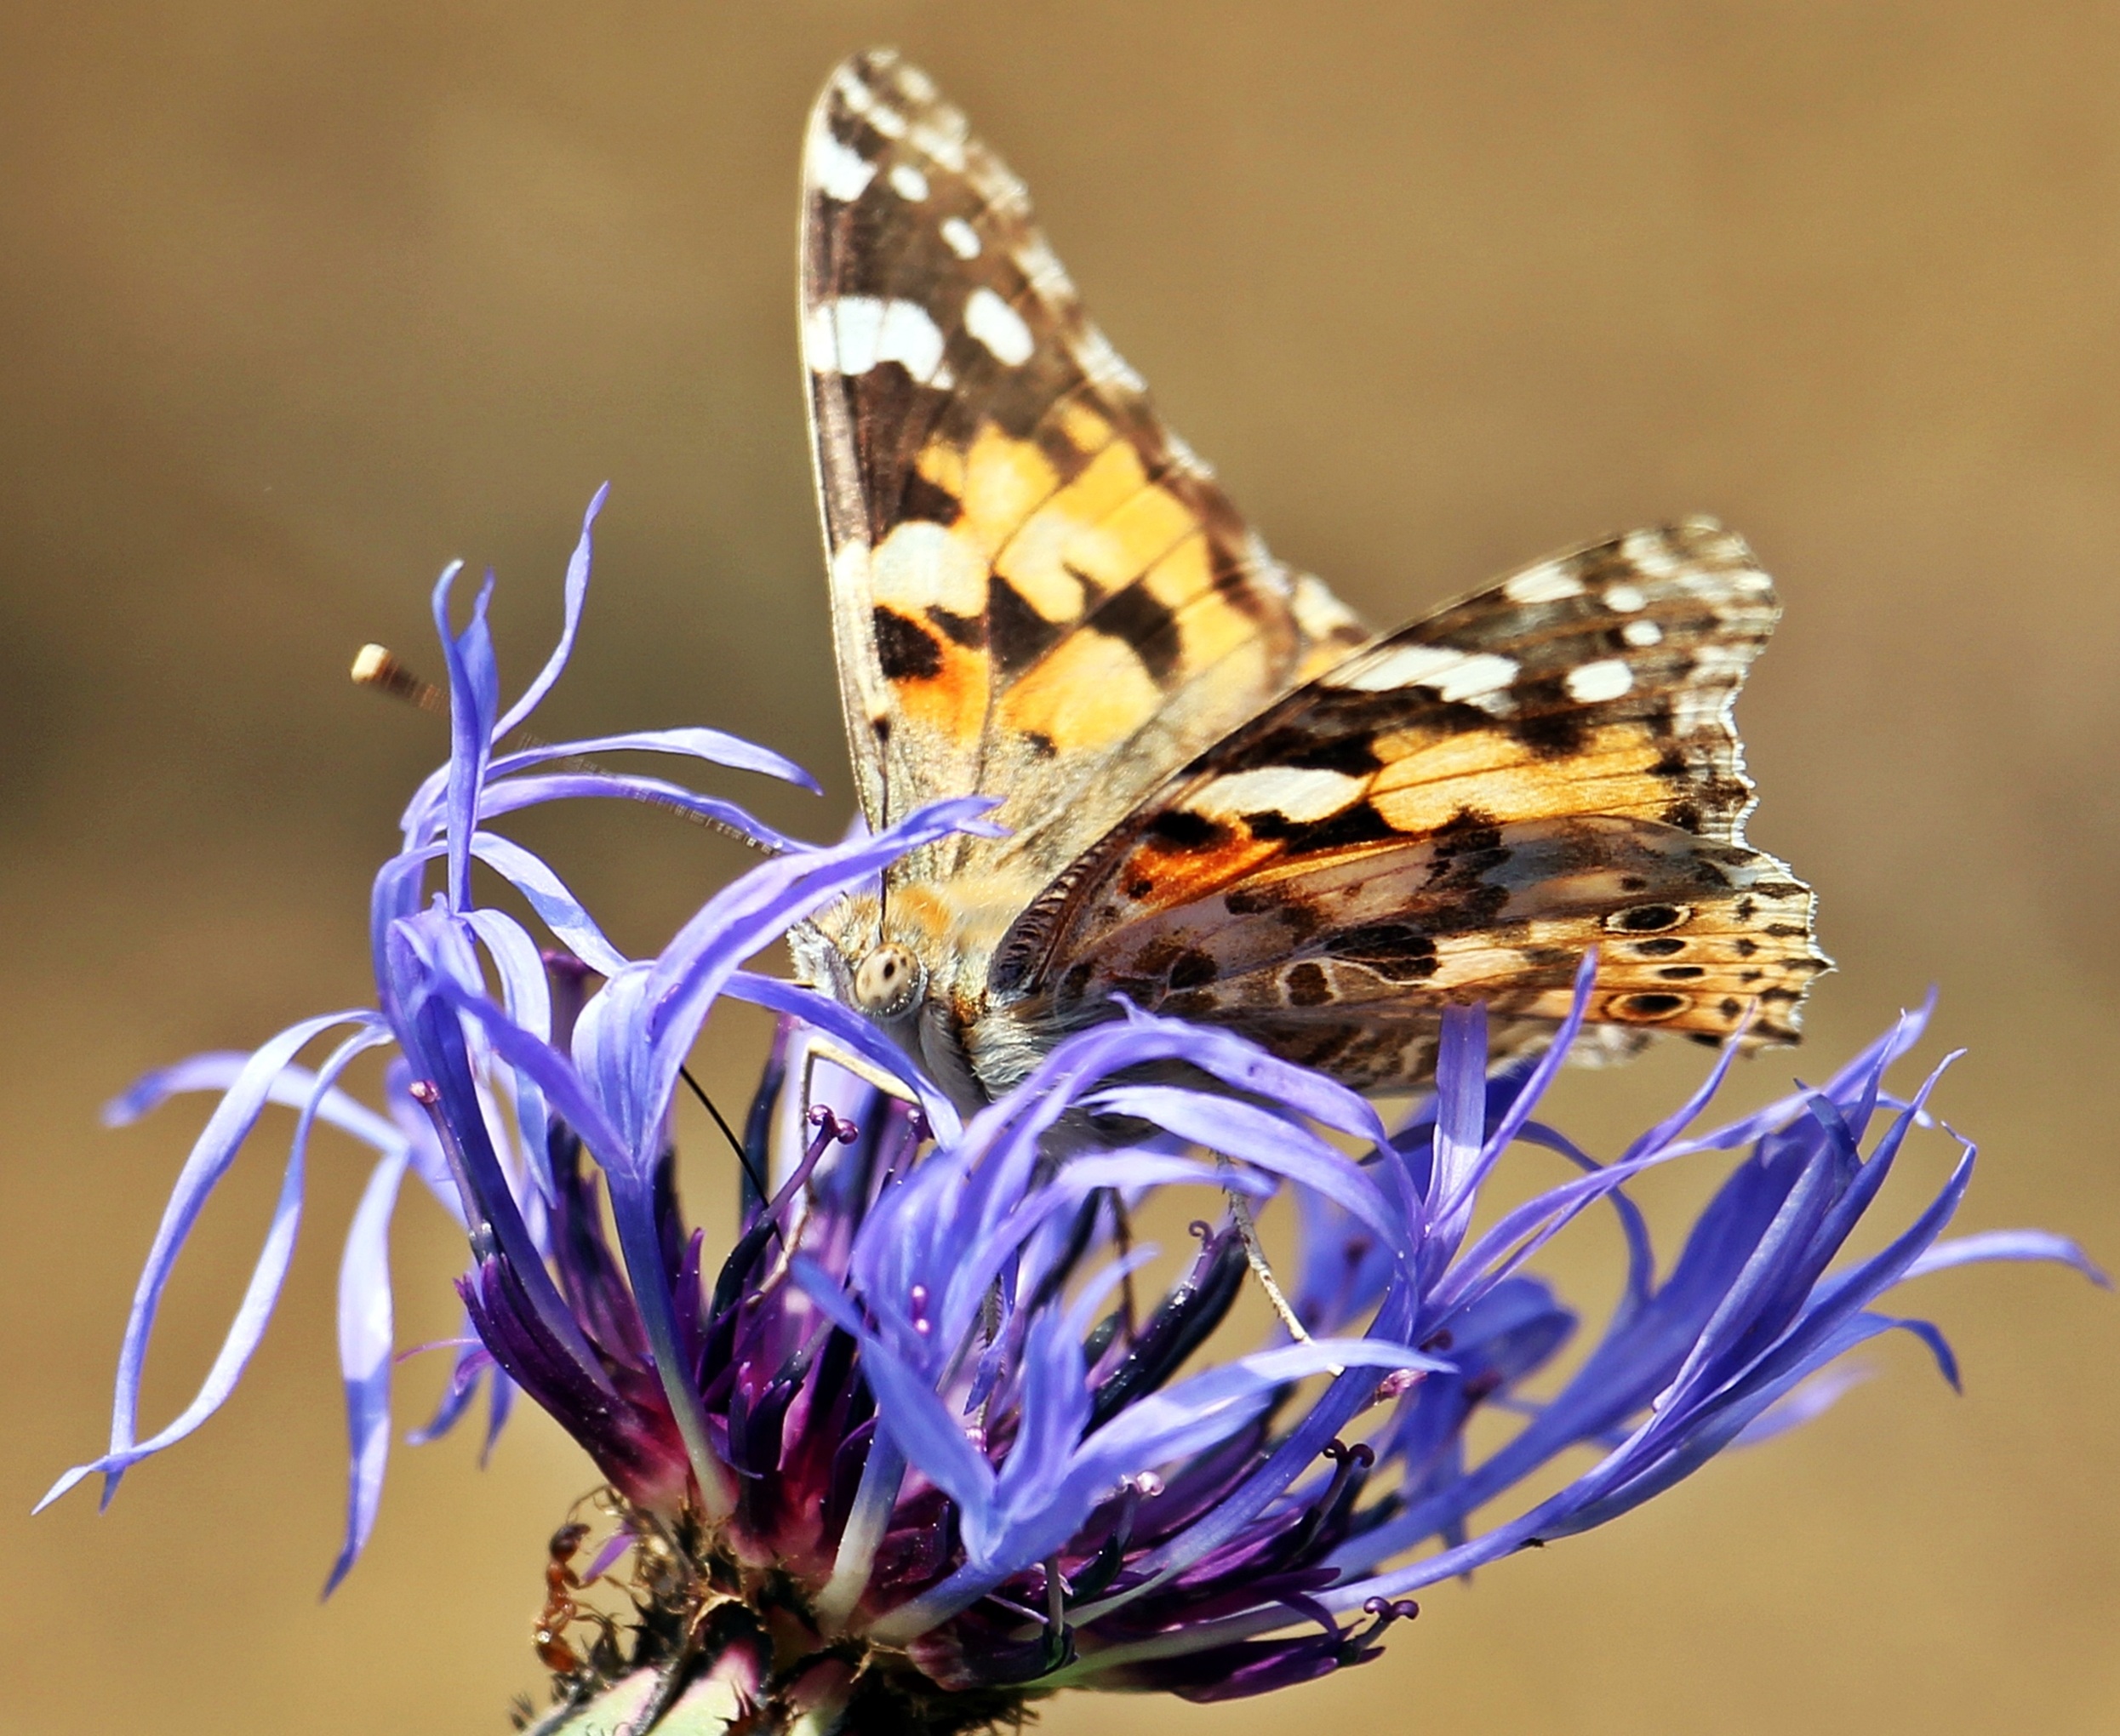 Butterfly on the Flower, Animal, Blooming, Butterfly, Flower, HQ Photo